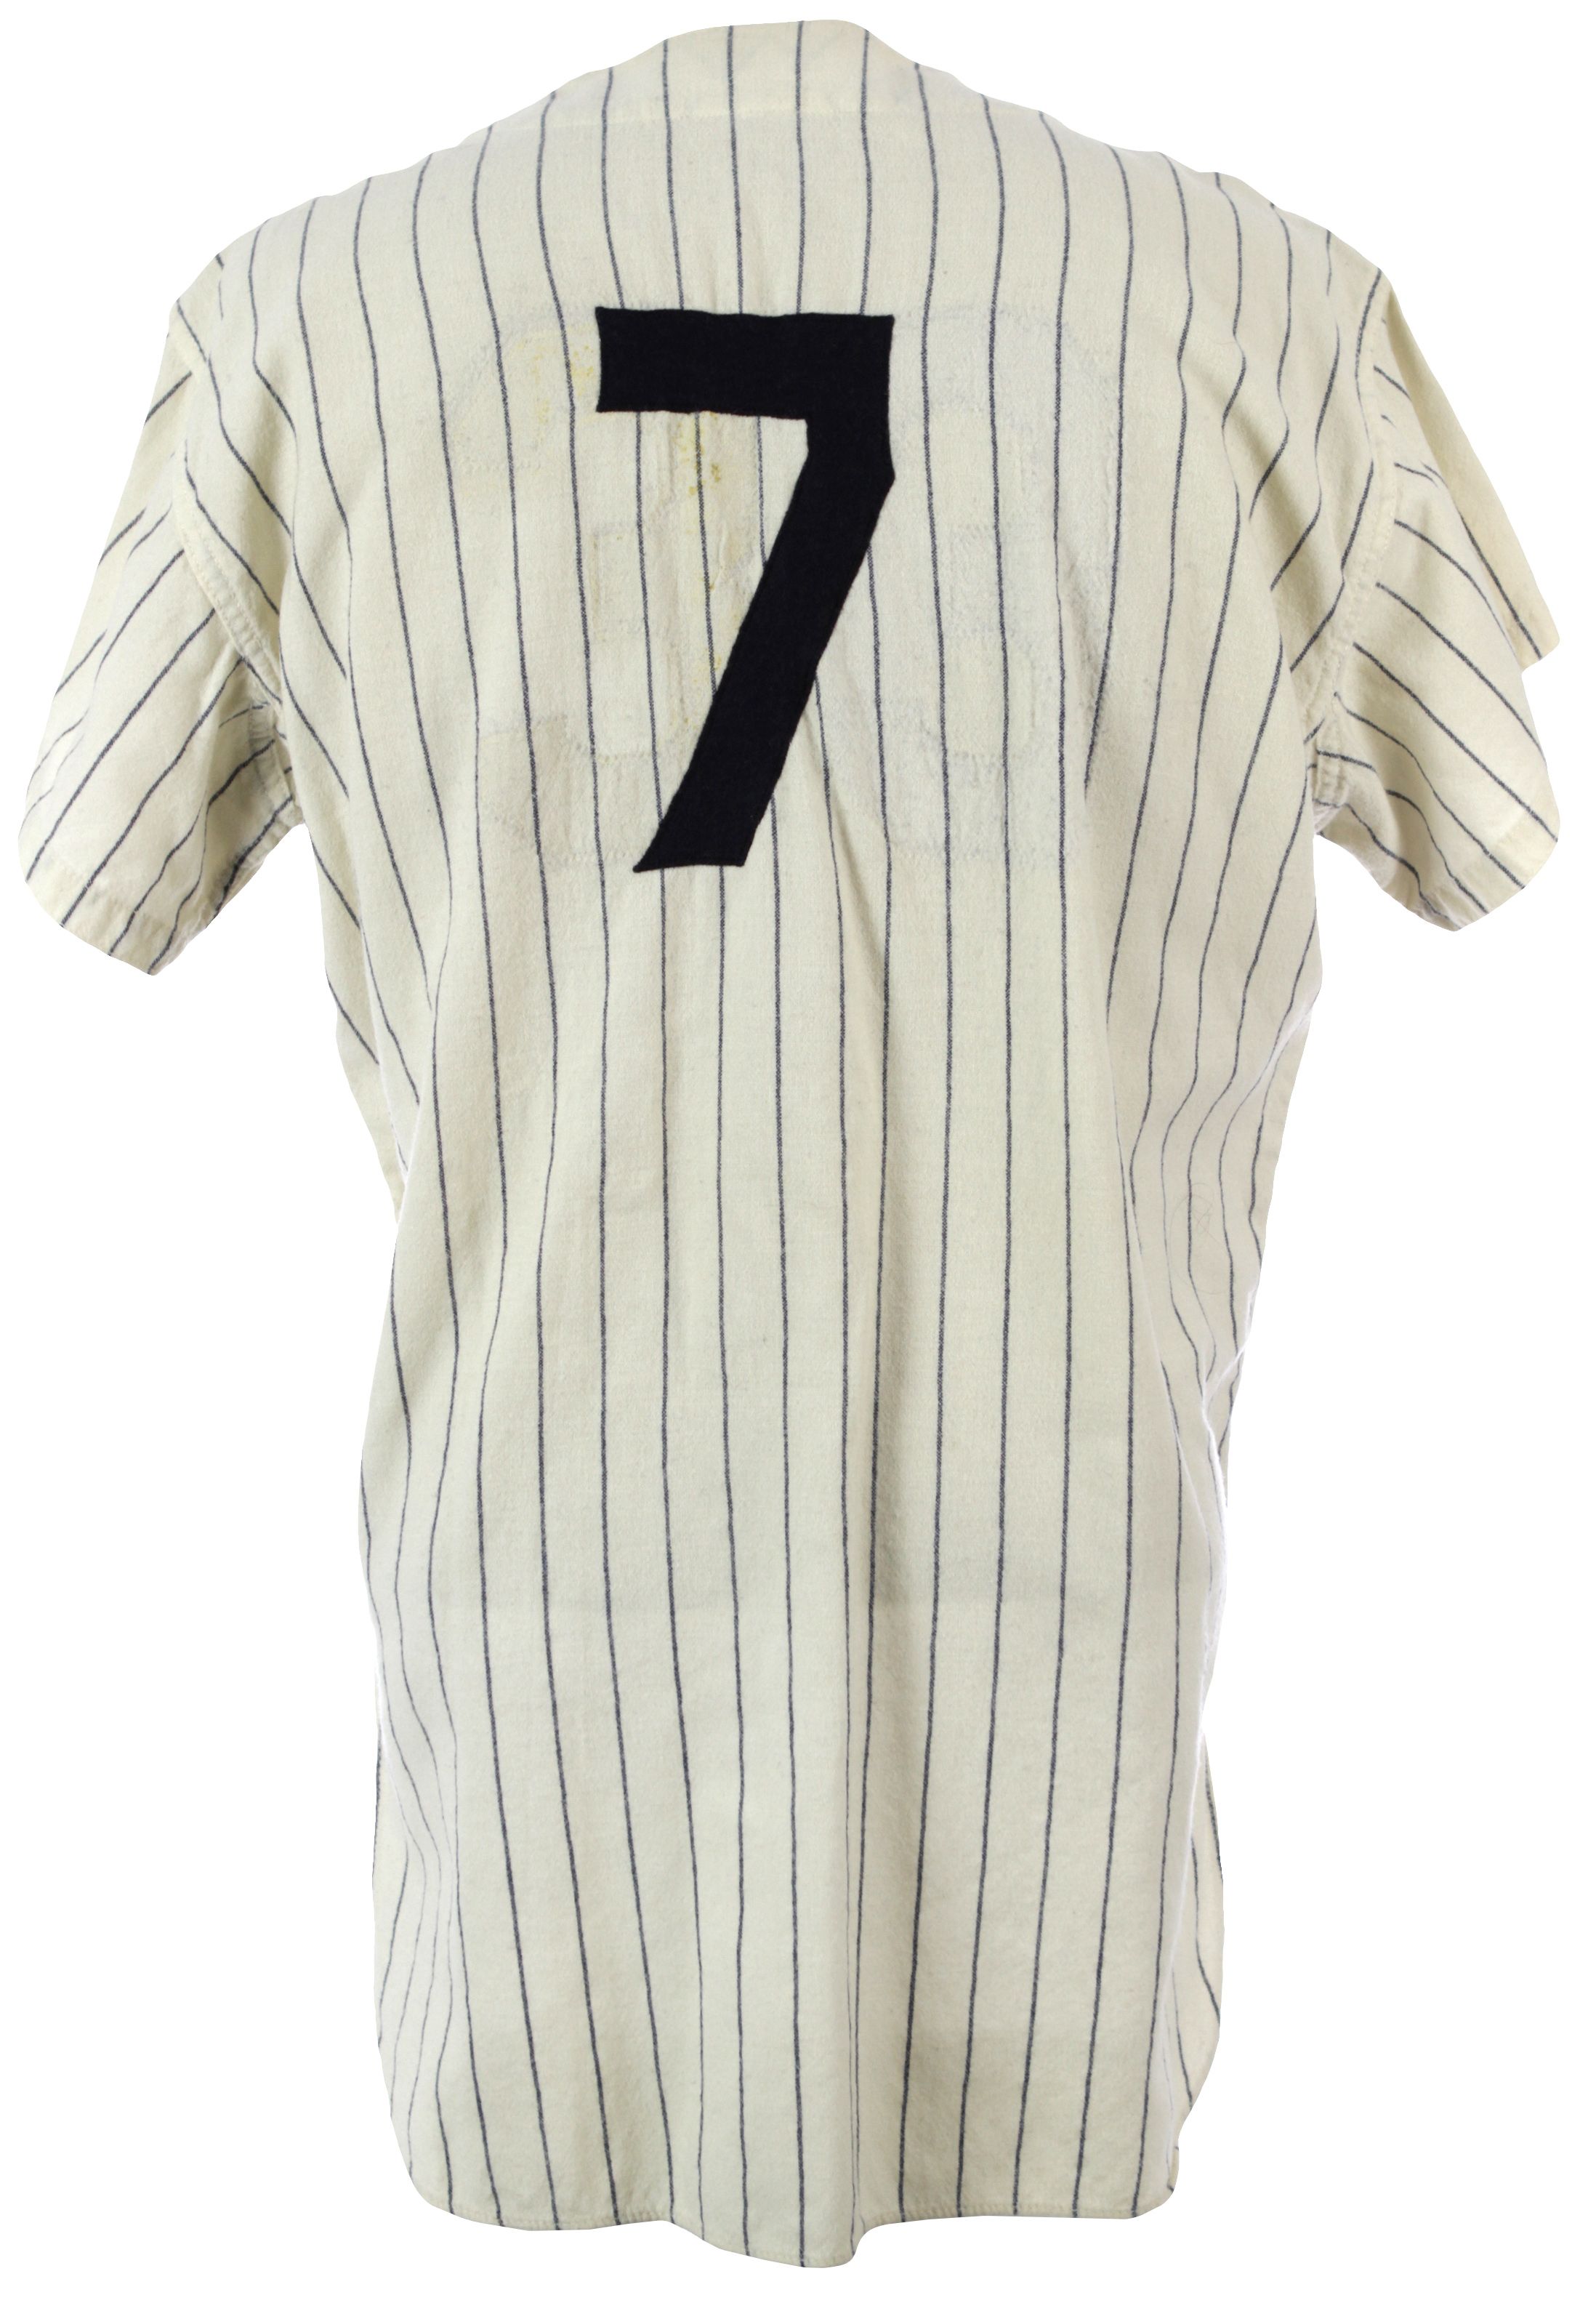 Lot Detail - 1966 Mickey Mantle New York Yankees Game Worn Home